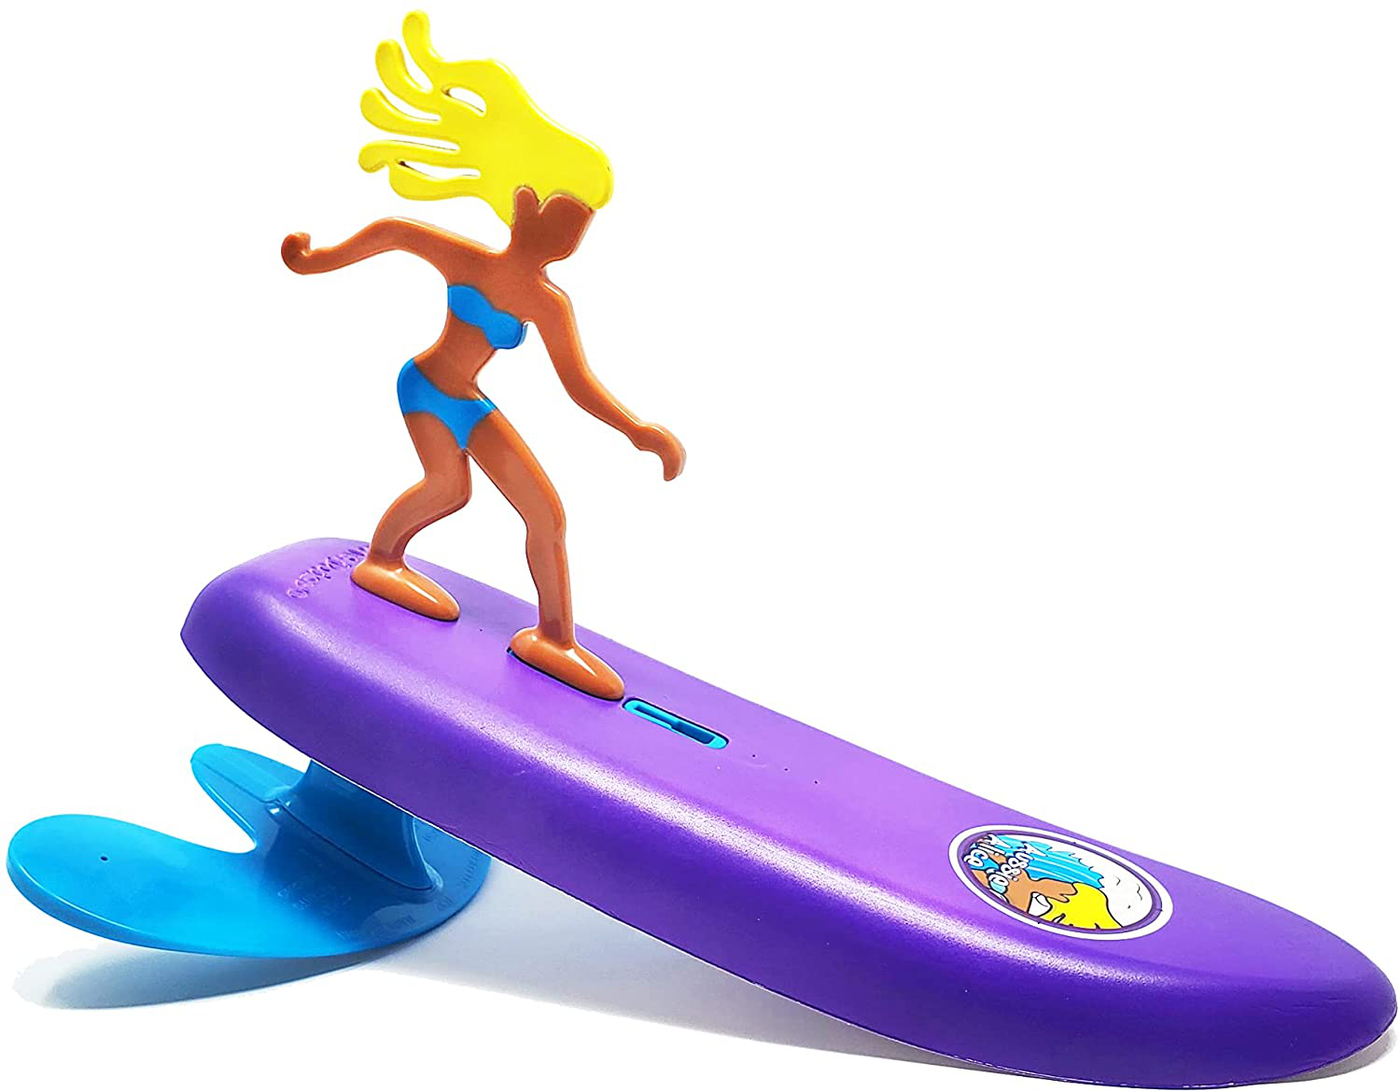 Surfer Dudes Classics Wave Powered Mini-Surfer and Surfboard Beach Toy - Costa Rica Rick